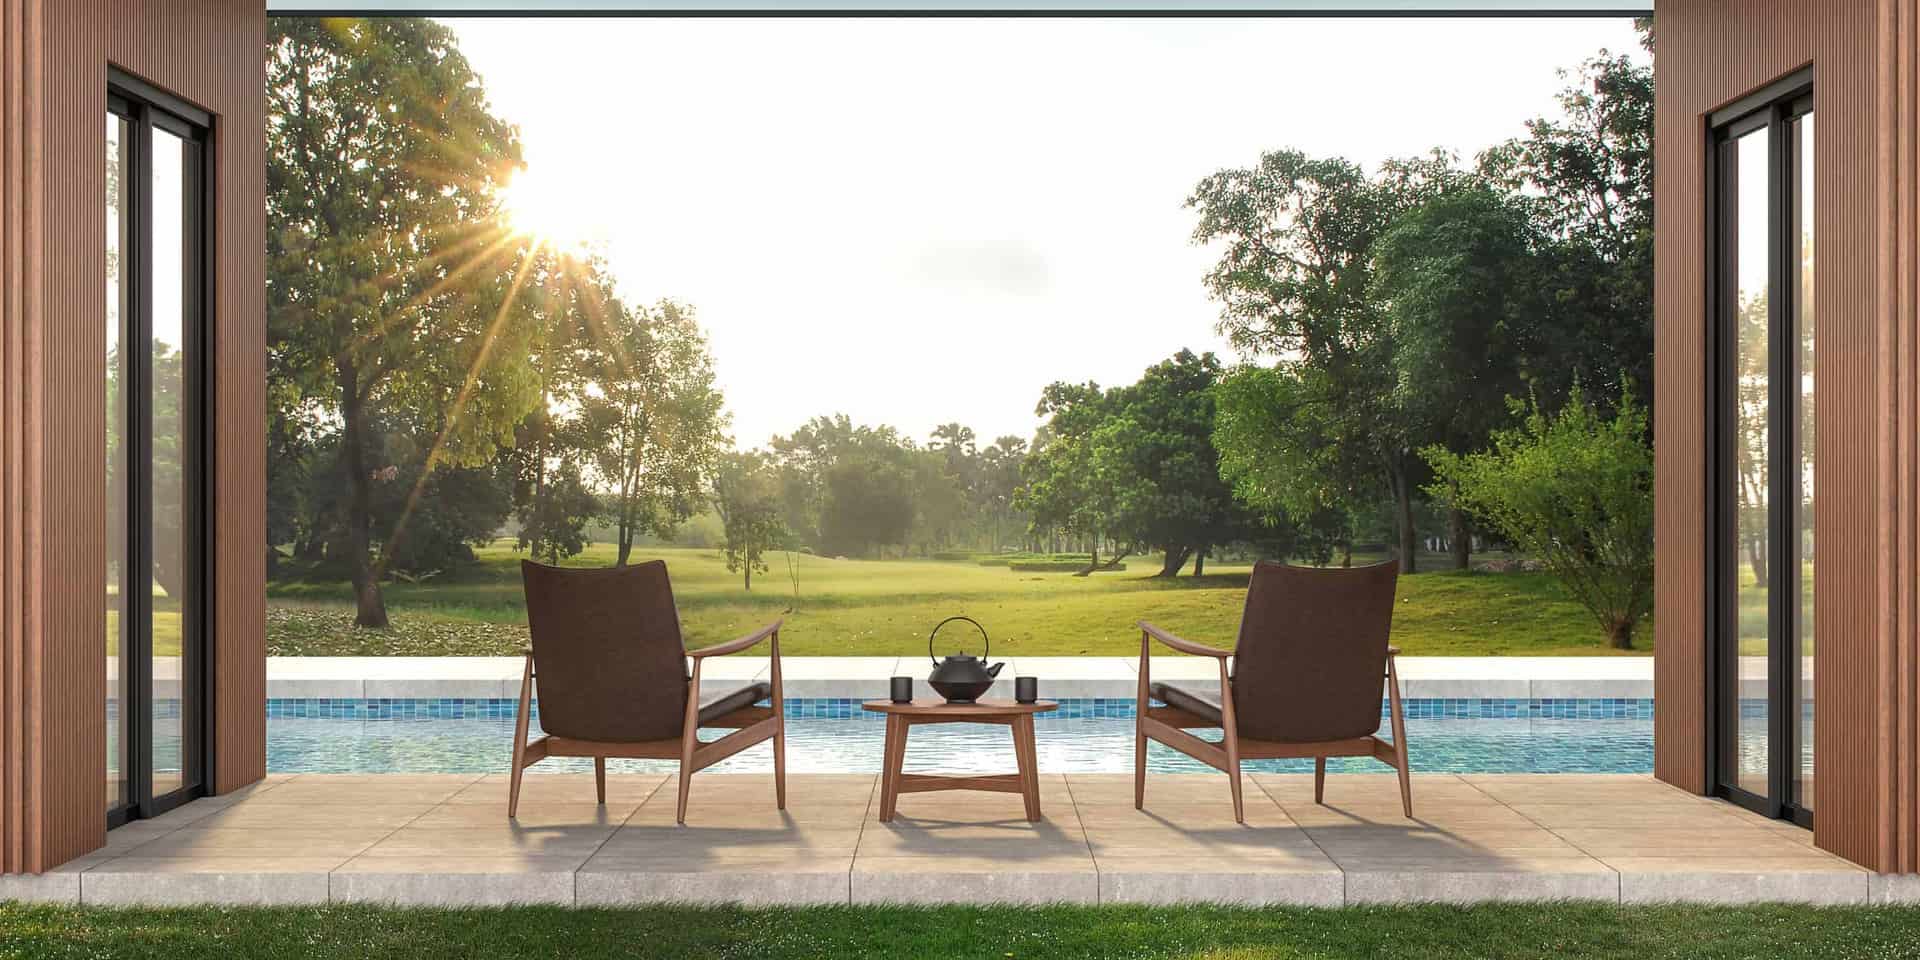 modern chairs outside modern house on patio looking over pool in backyard